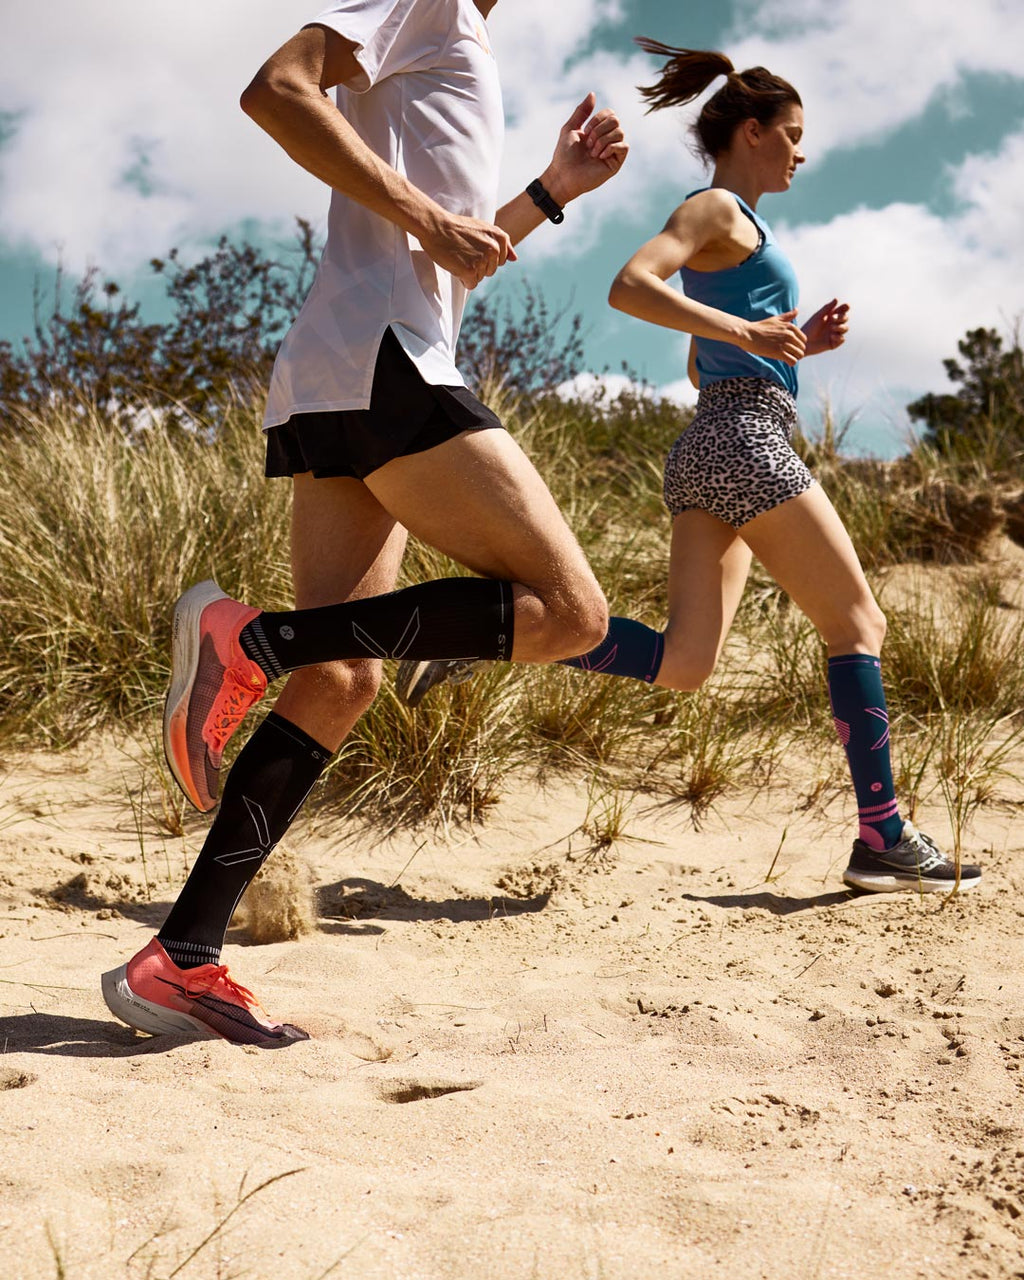 Legs of a man and woman running on sandy ground wearing a white and blue tank top